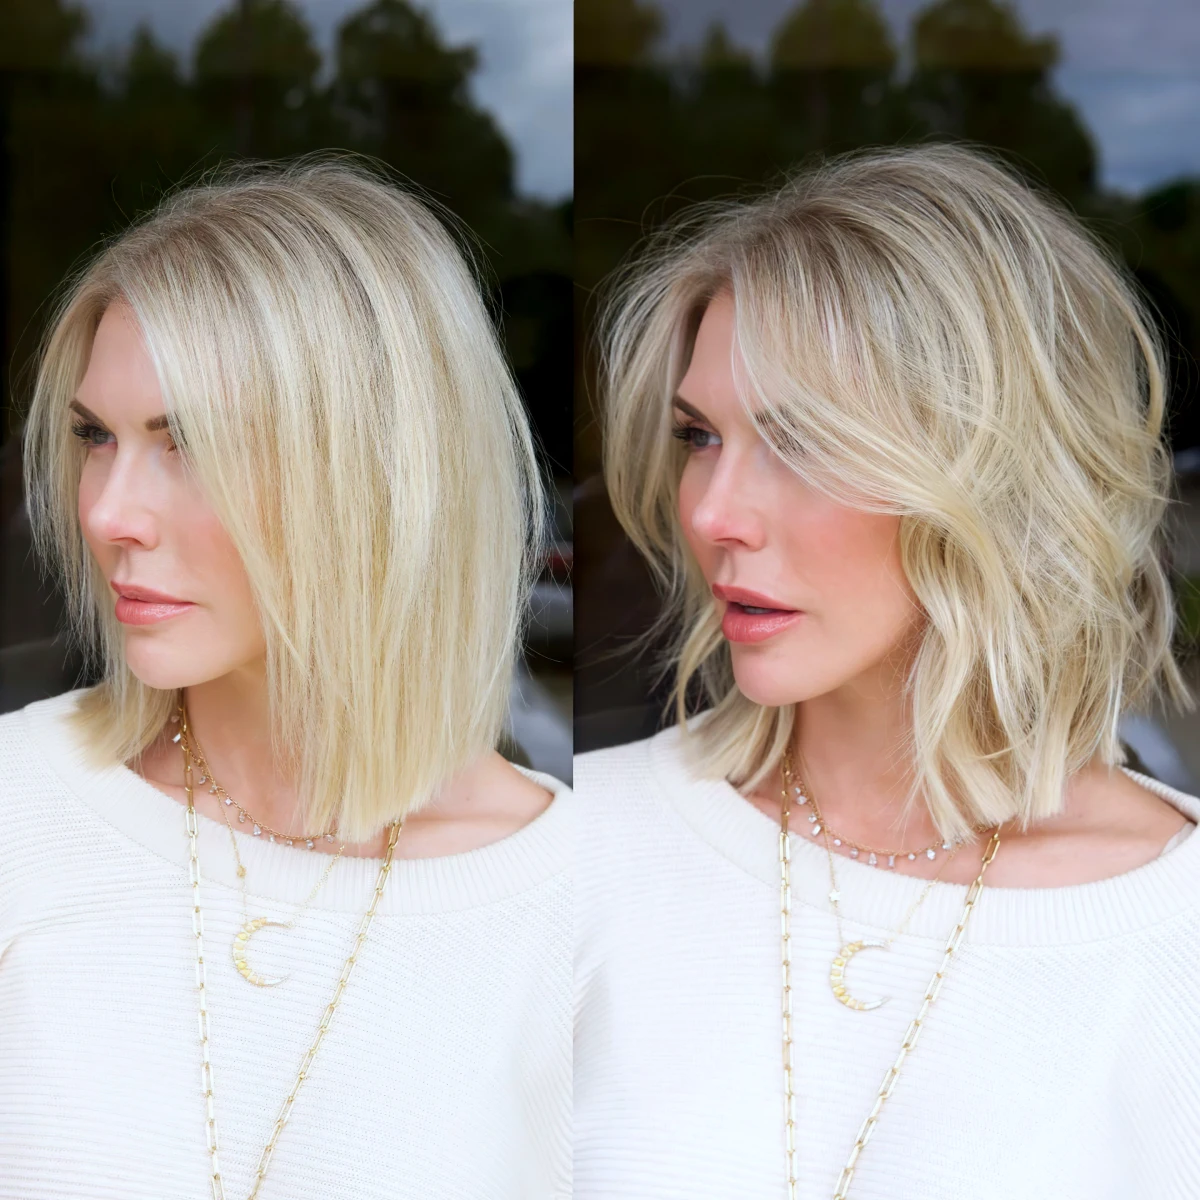 coupe carre court degrade femme 60 ans blonde pull blanc